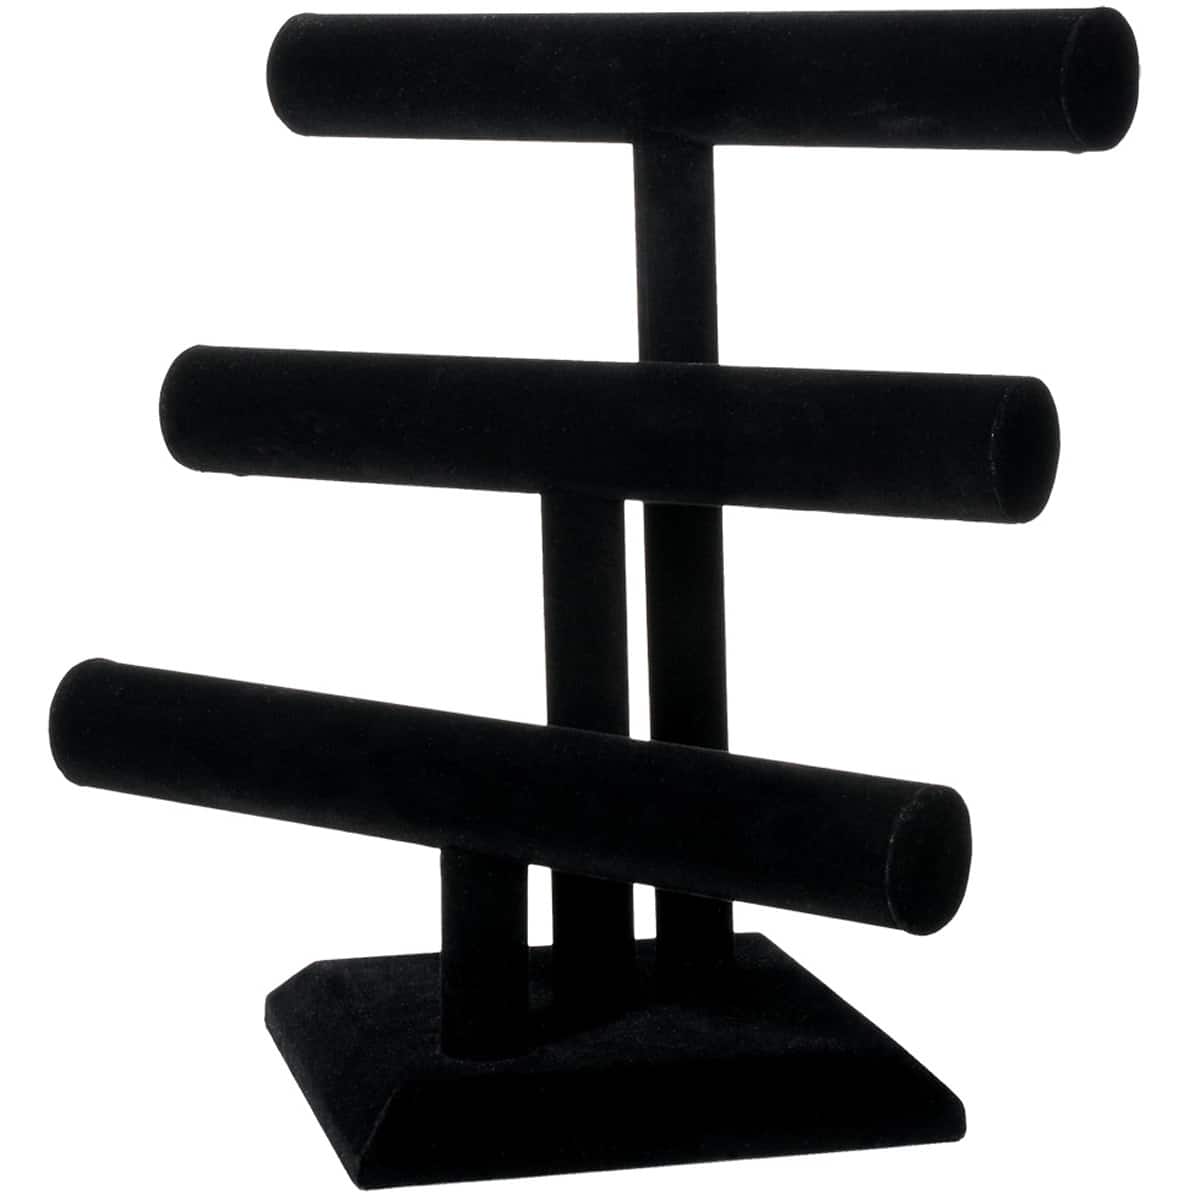 3-Tier Black Velvet Jewelry Display for Storing or Selling Bracelets,  Necklaces, Bangles, Accessories T-Bar Holder and Organizer Rack Stand for  Dresser, Vanity (12x9x7 in)